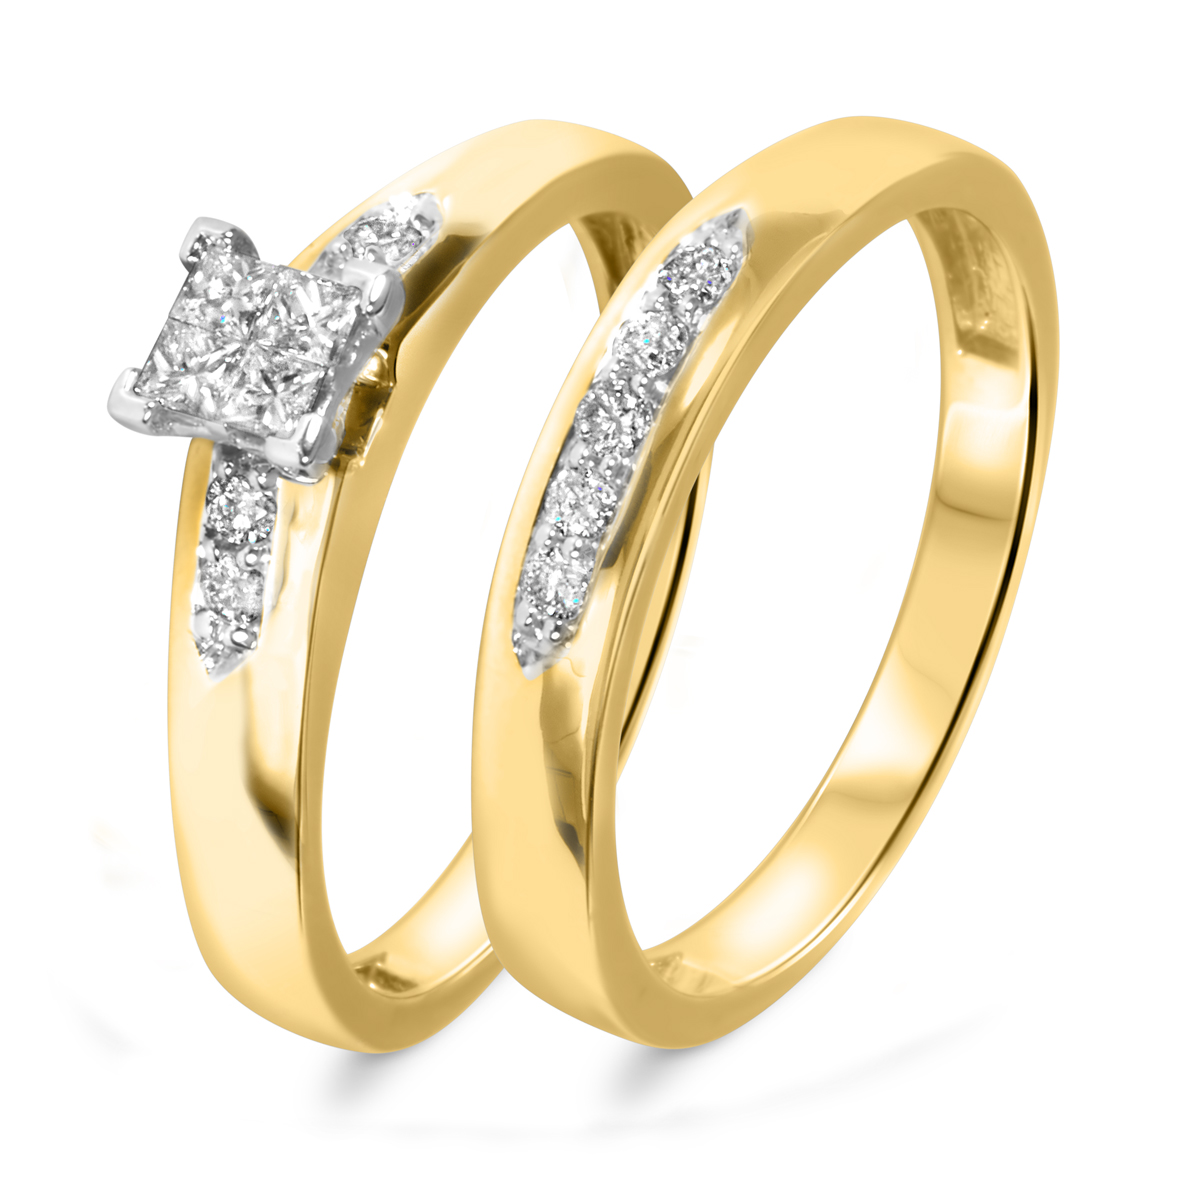 Unique Engagement Rings for Your Special Day | Barkev's